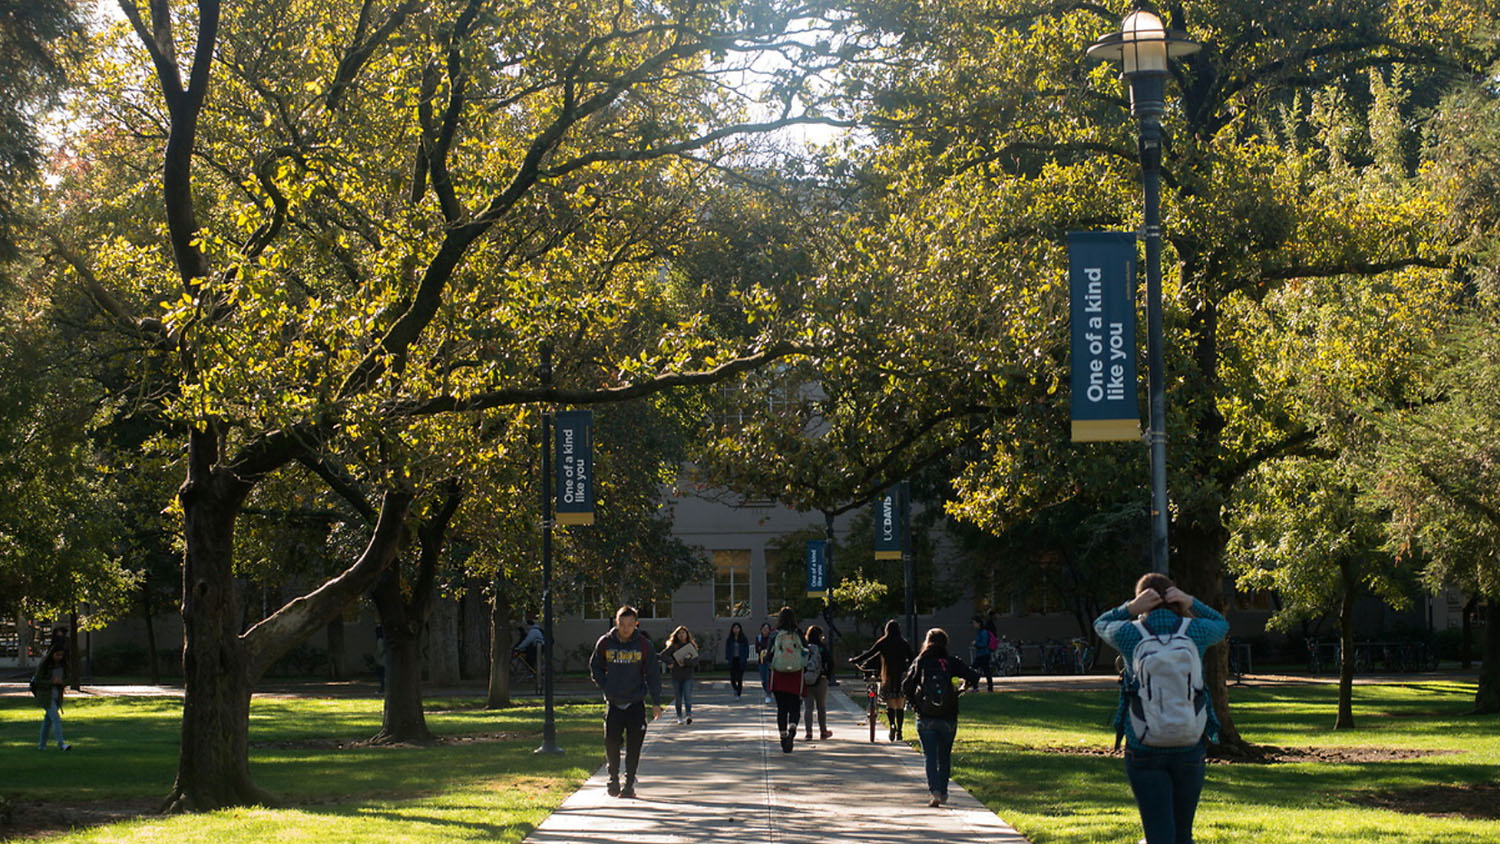 Students walking in the center of a primary UC Davis quad area.